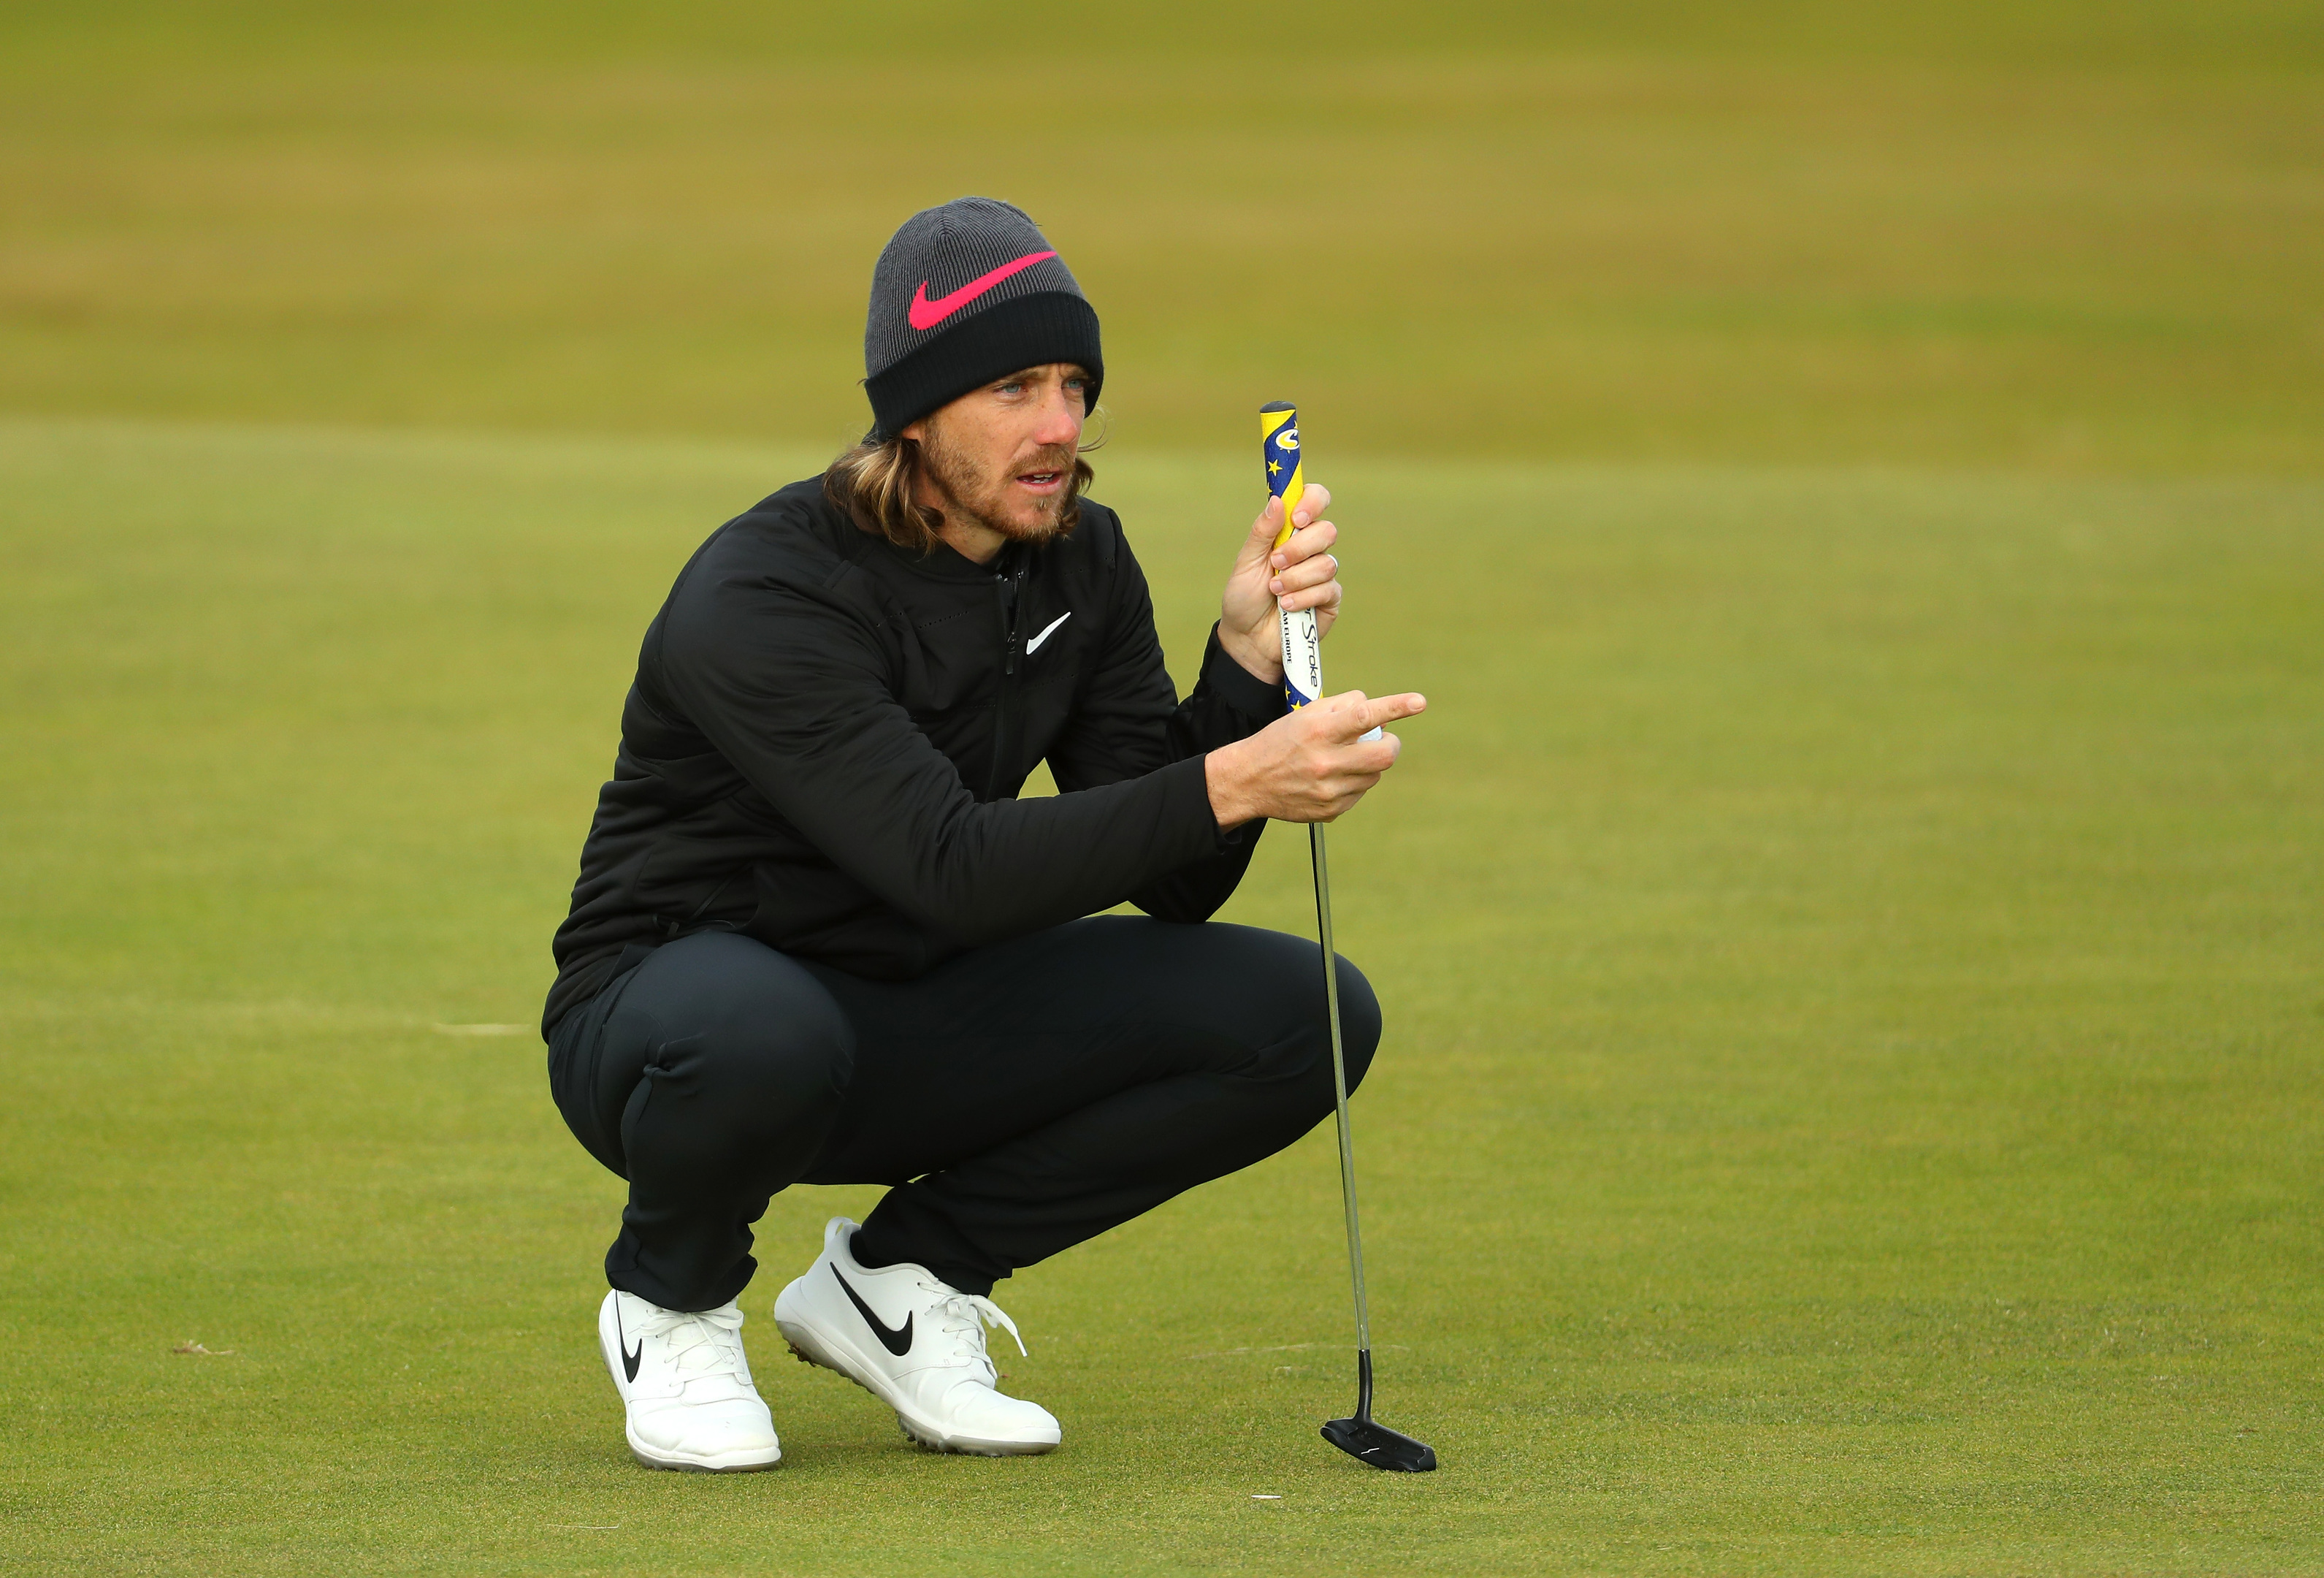 Tommy Fleetwood of England lines up a putt in his final round at St Andrews